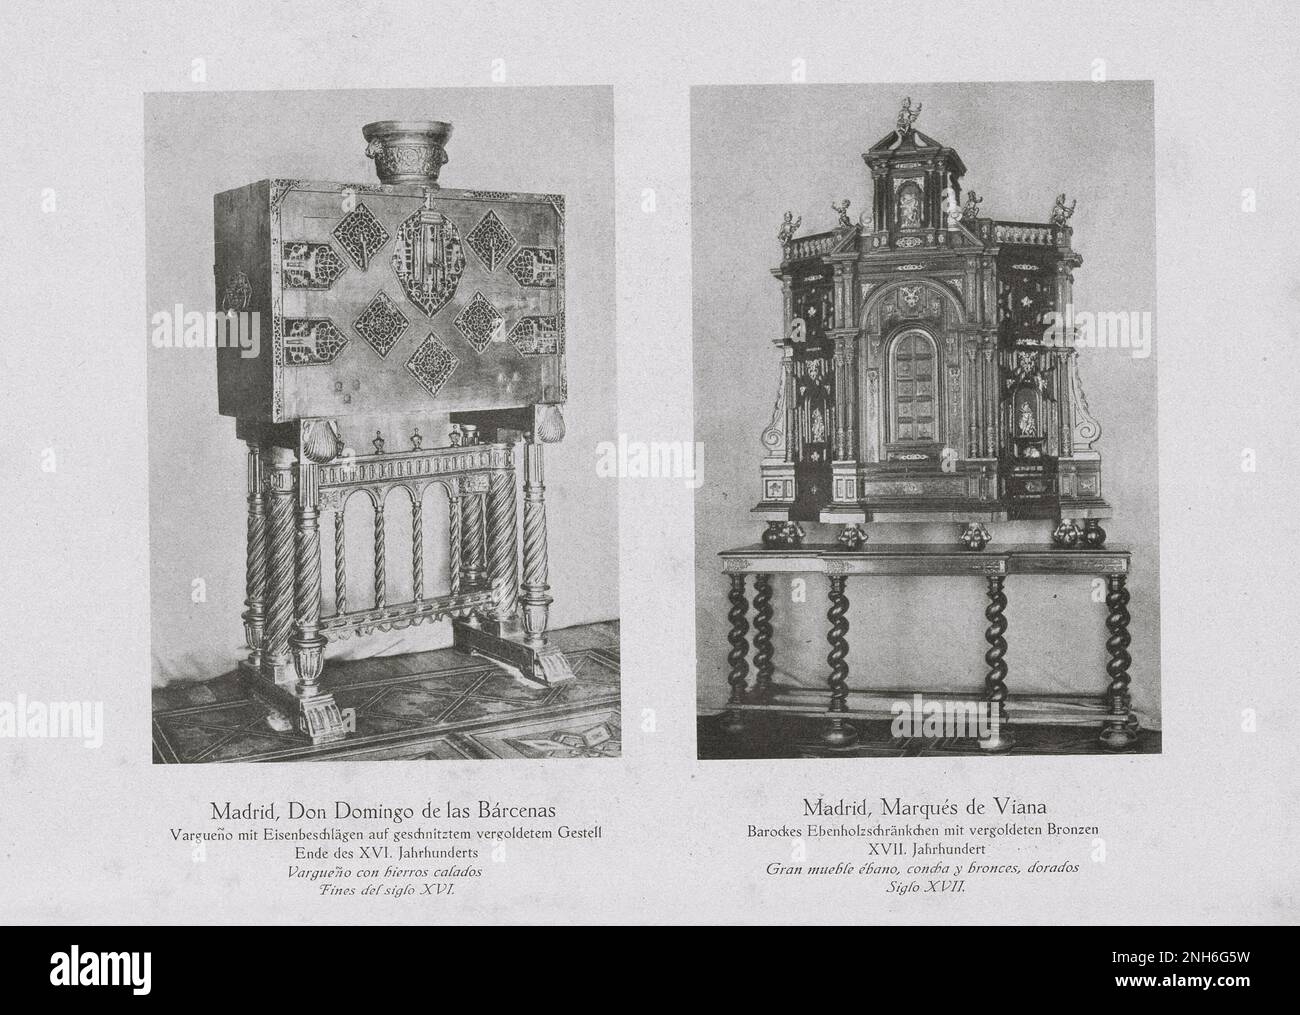 Art of Old Spain. Don Domingo de las Barcenas, Madrid. Vintage photo of Vargueno with iron fittings on a carved gilded frame. End of the XVI century (left). Marques de Viana, Madrid. Baroque ebony wood cabinet with gilded bronzes XVII century (right) Stock Photo